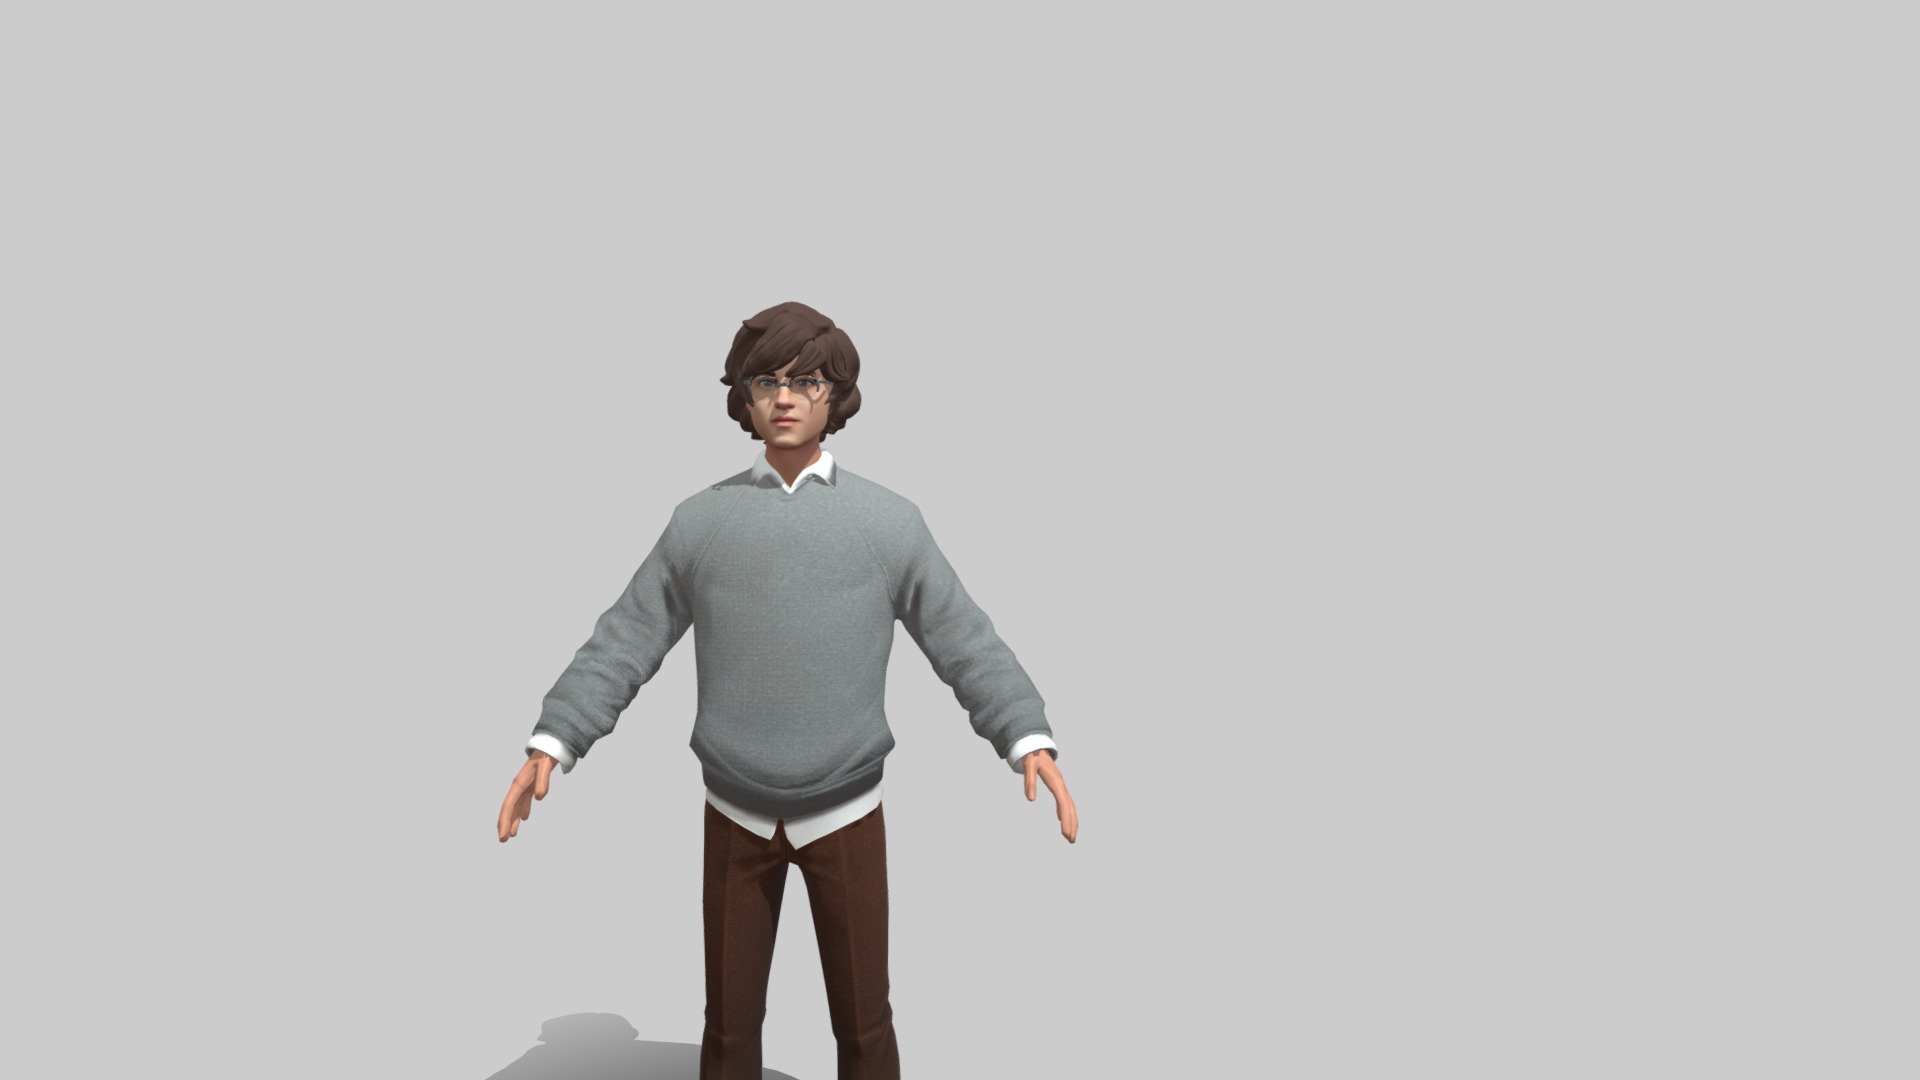 this is harry potter movie character

instagram
https://www.instagram.com/rrbstudios_official/ - Harry Potter (rigged) Character - Download Free 3D model by RRB STUDIOS (@RRBSTUDIOS) 3d model